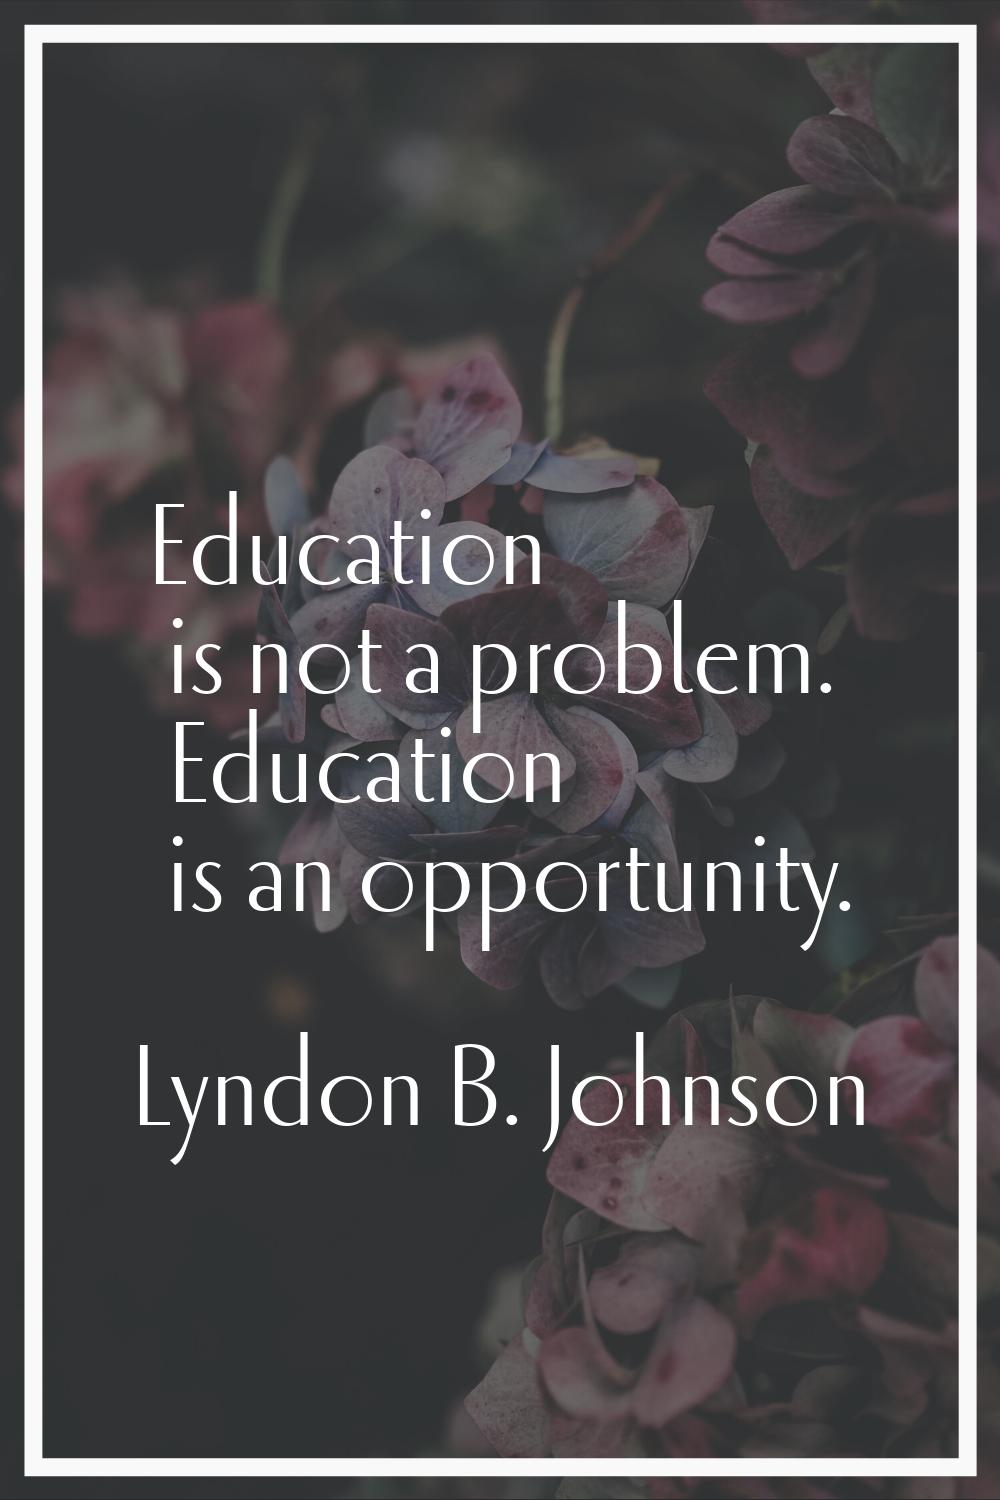 Education is not a problem. Education is an opportunity.